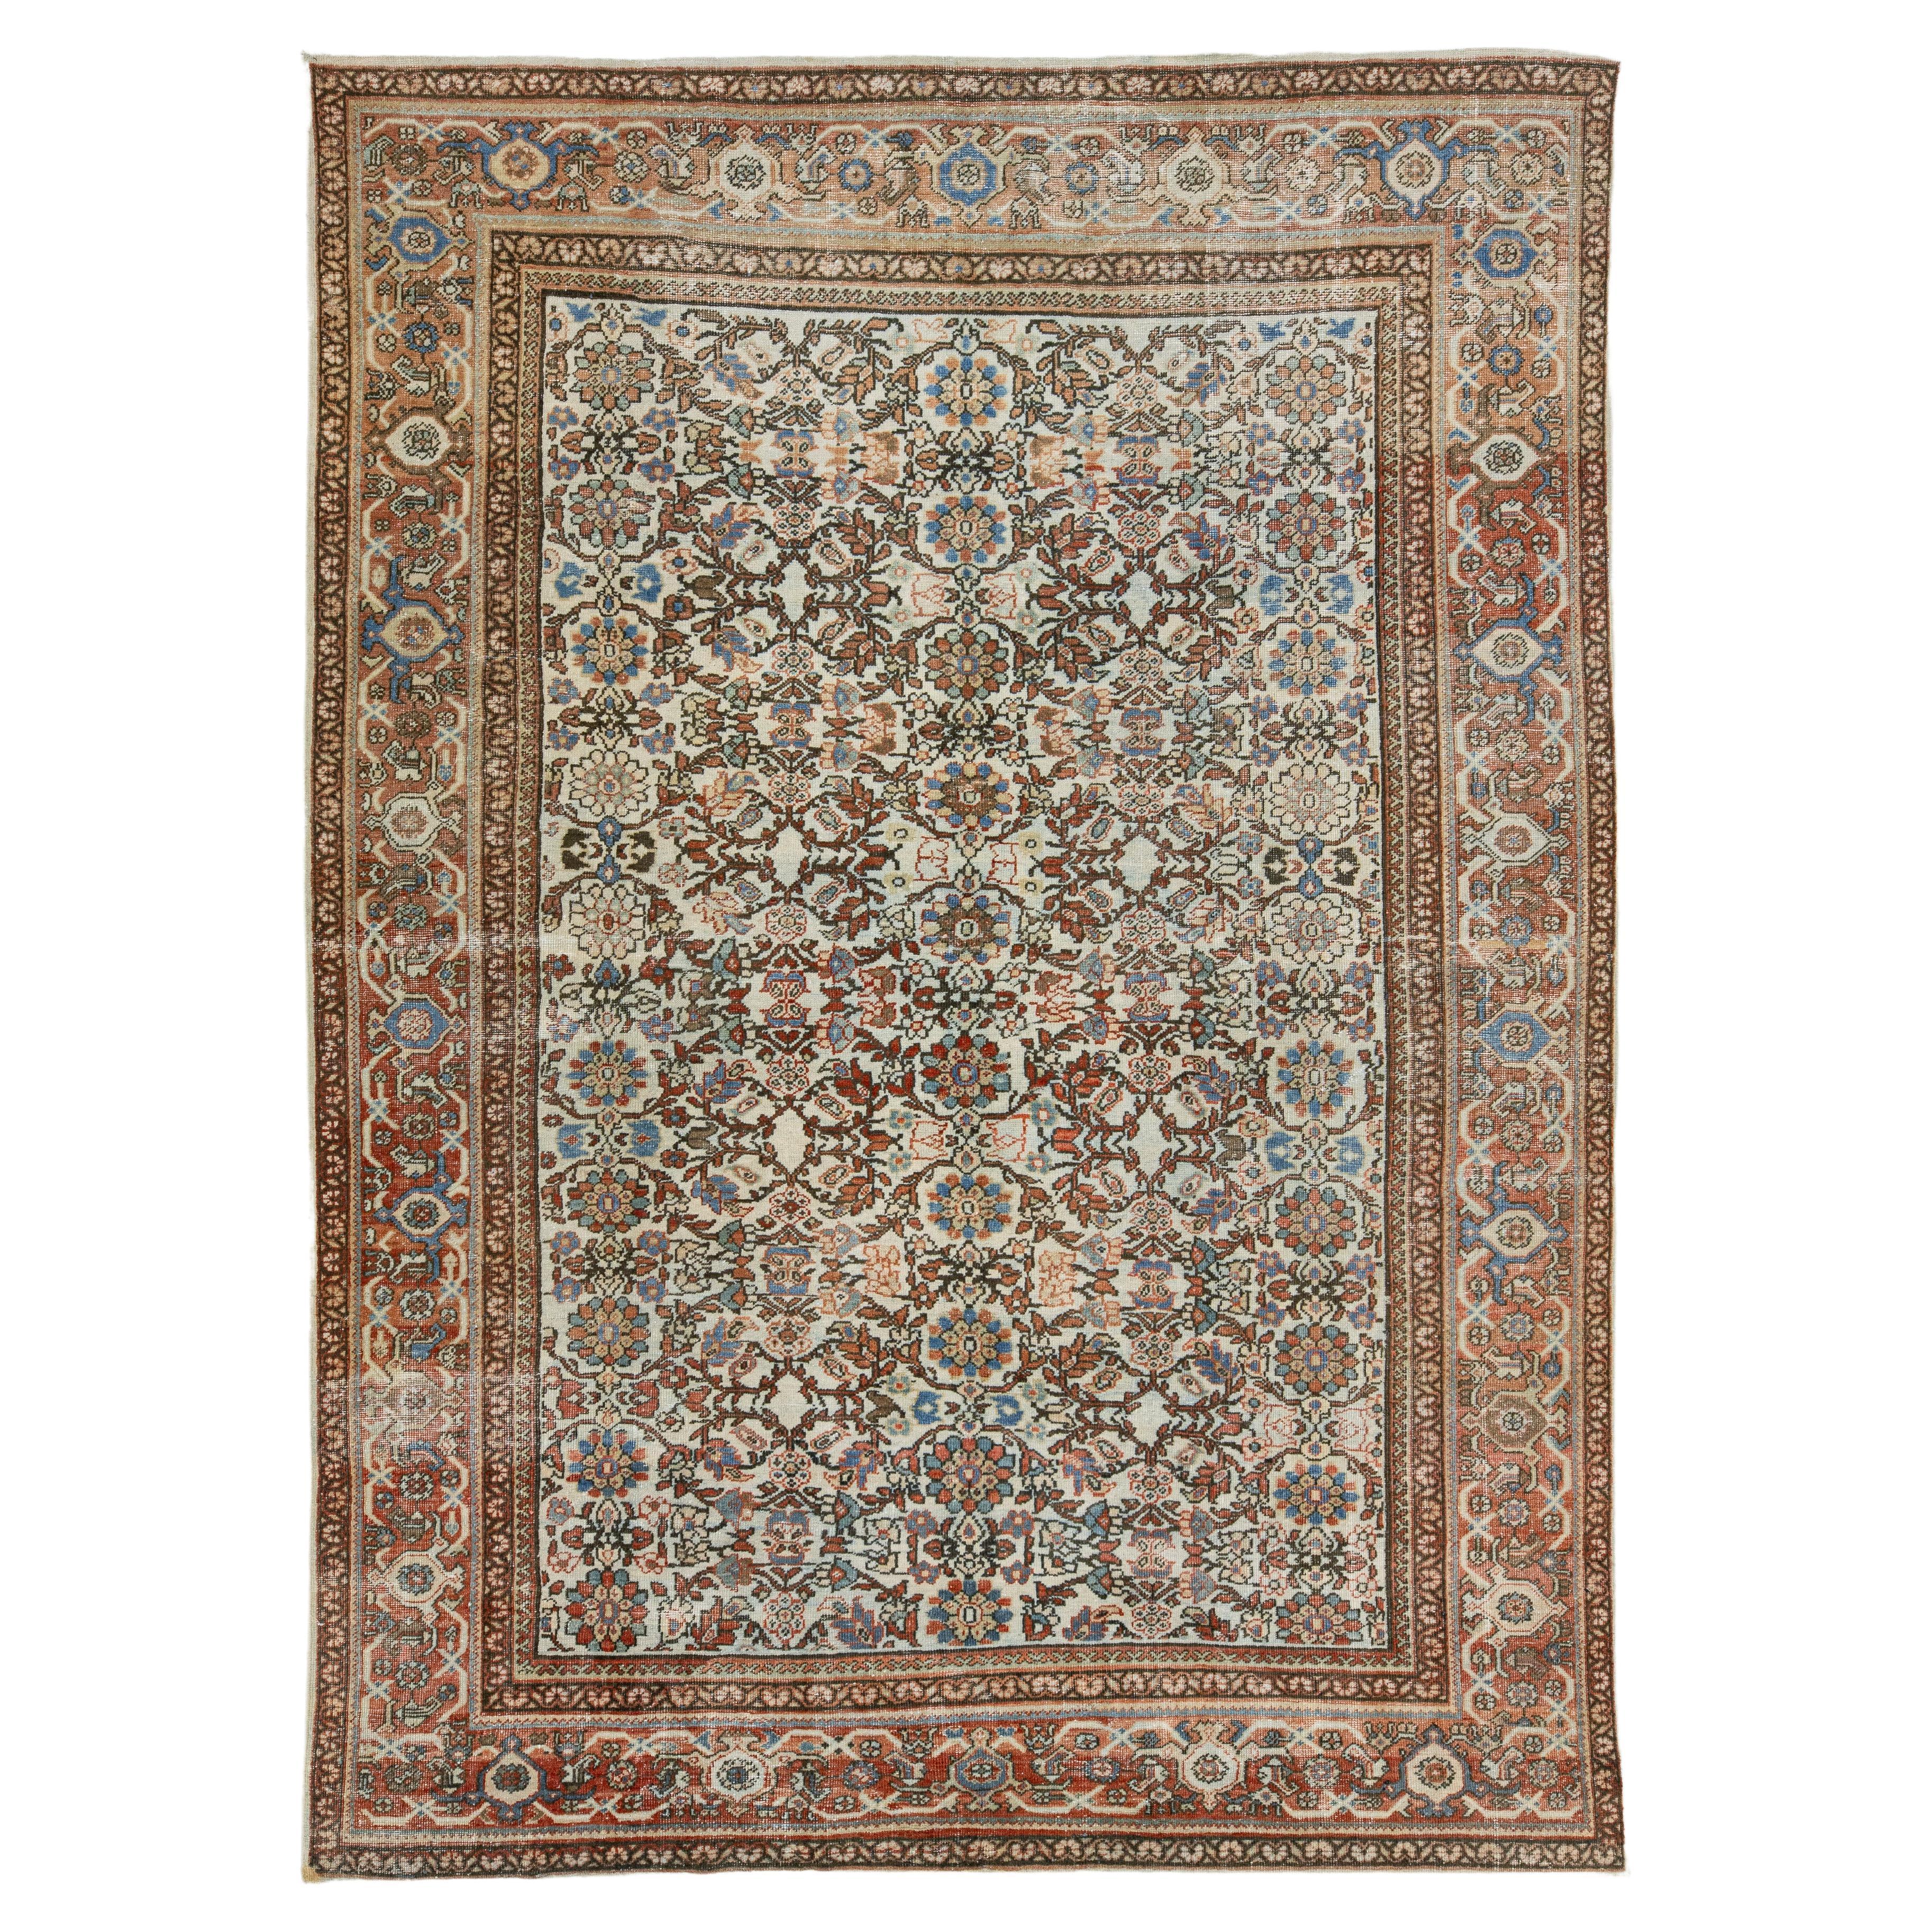 Handmade Multicolor Persian Mahal Designed Wool Rug From the 1910s For Sale